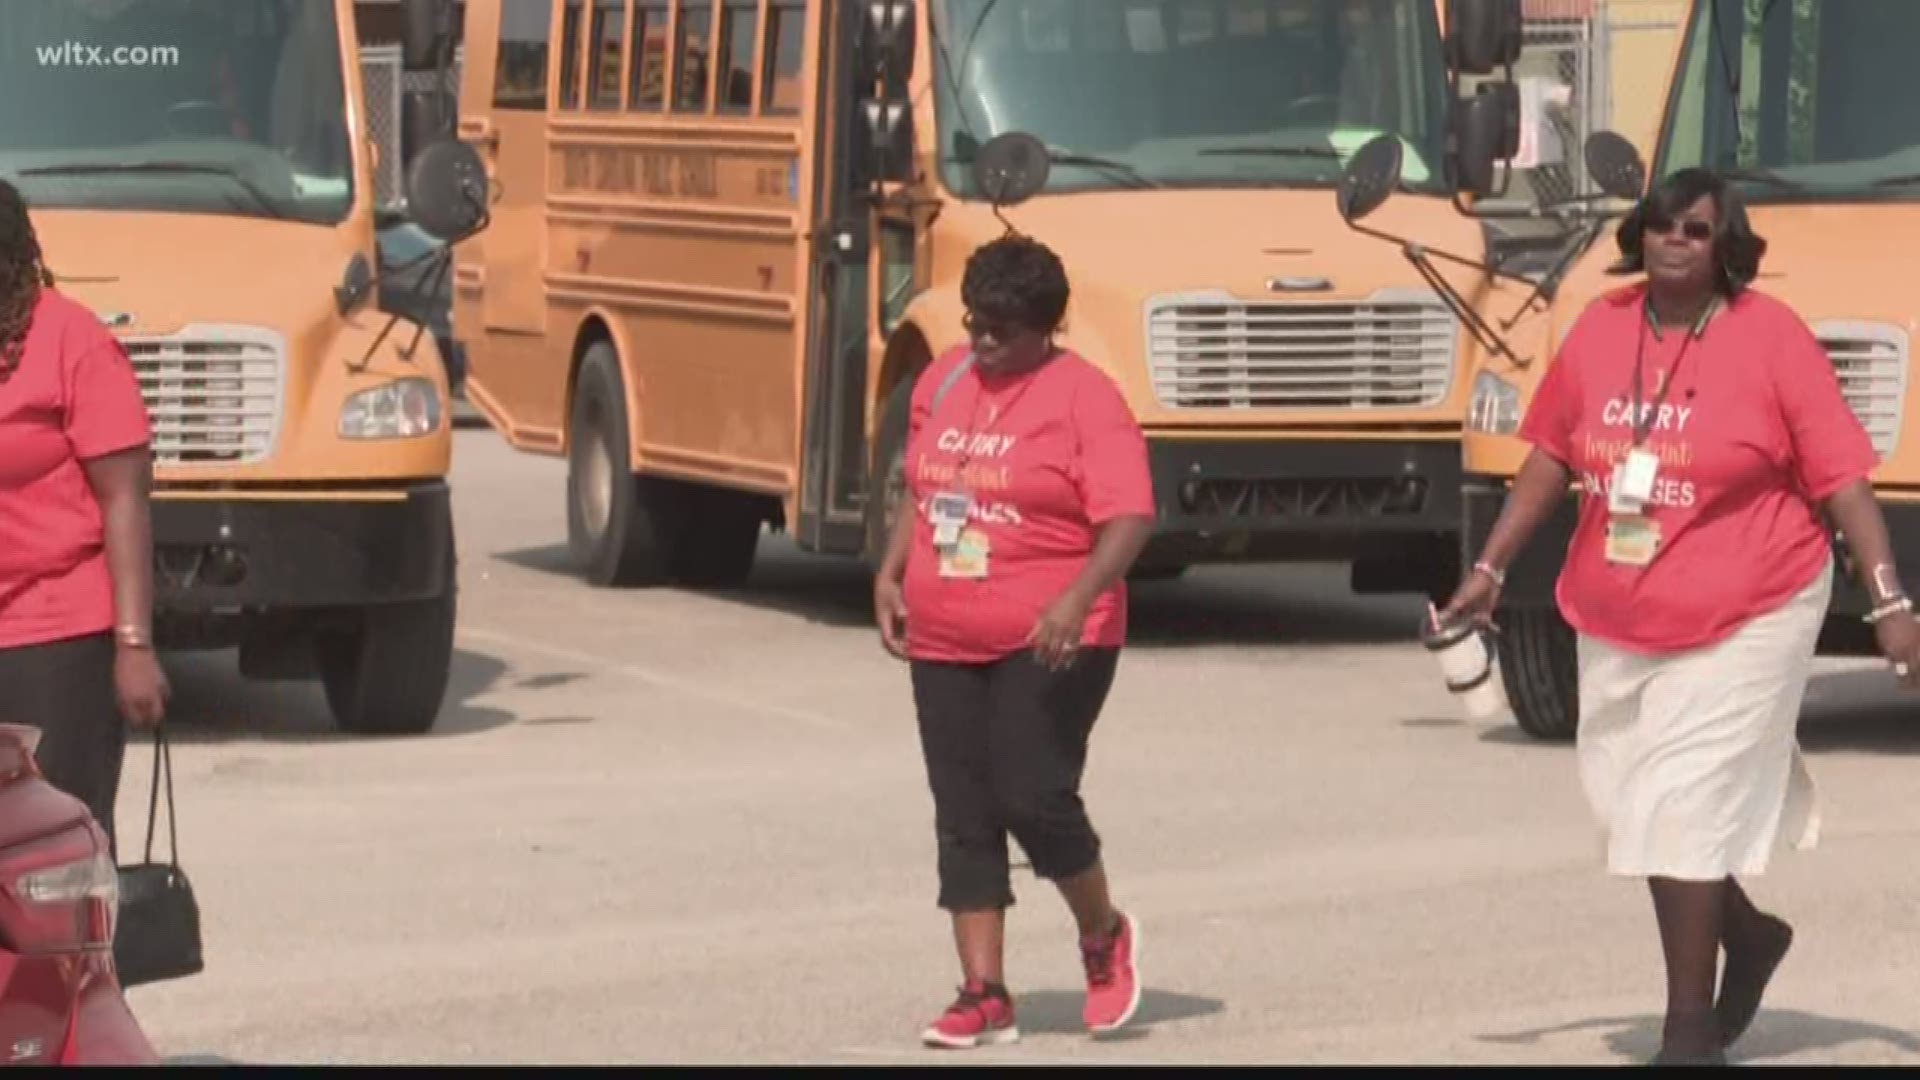 On Monday, the drivers protested at the district office demanding answers to what they call pay discrepancies.